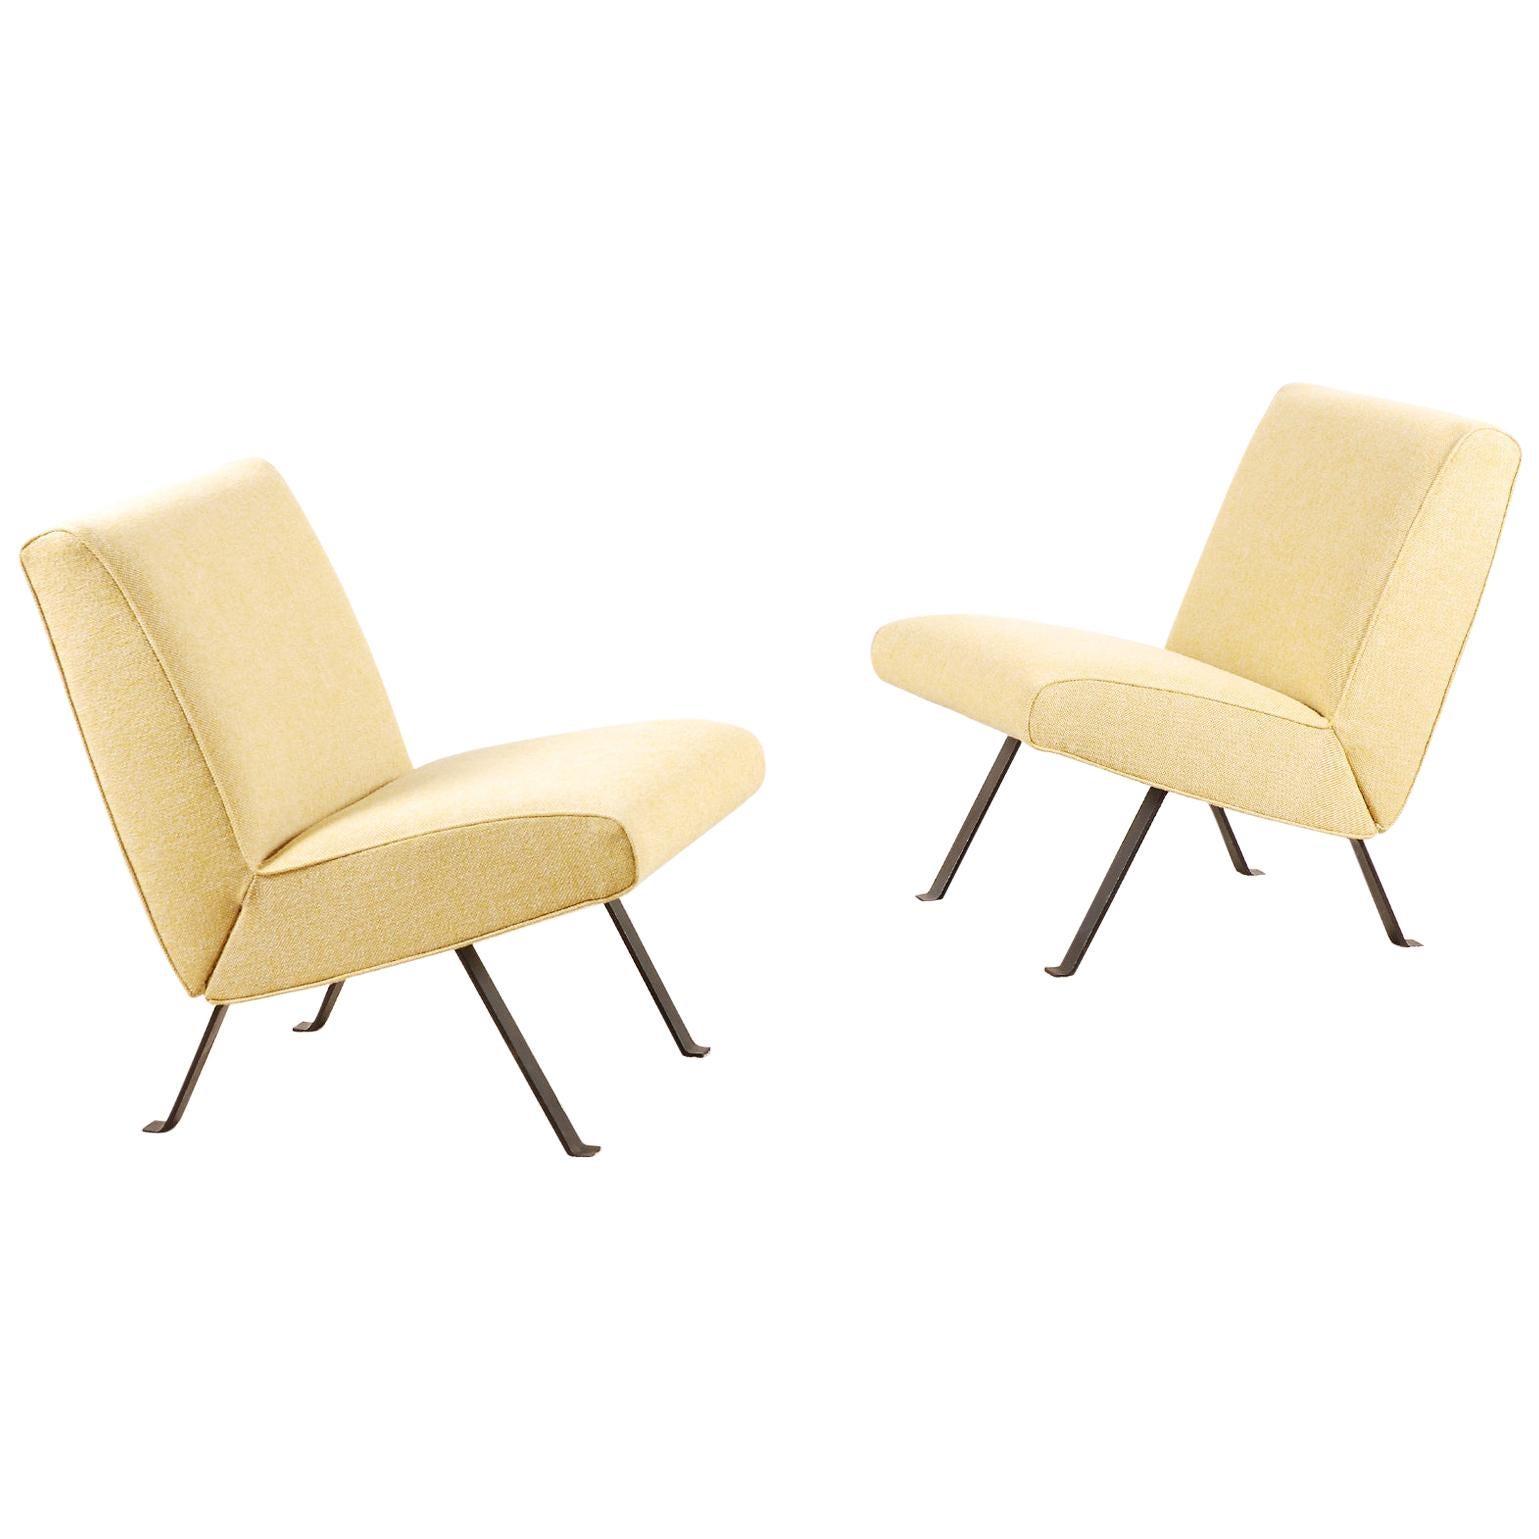 Joseph-André Motte, Pair of Lounge Chairs Model 740 for Steiner, 1957